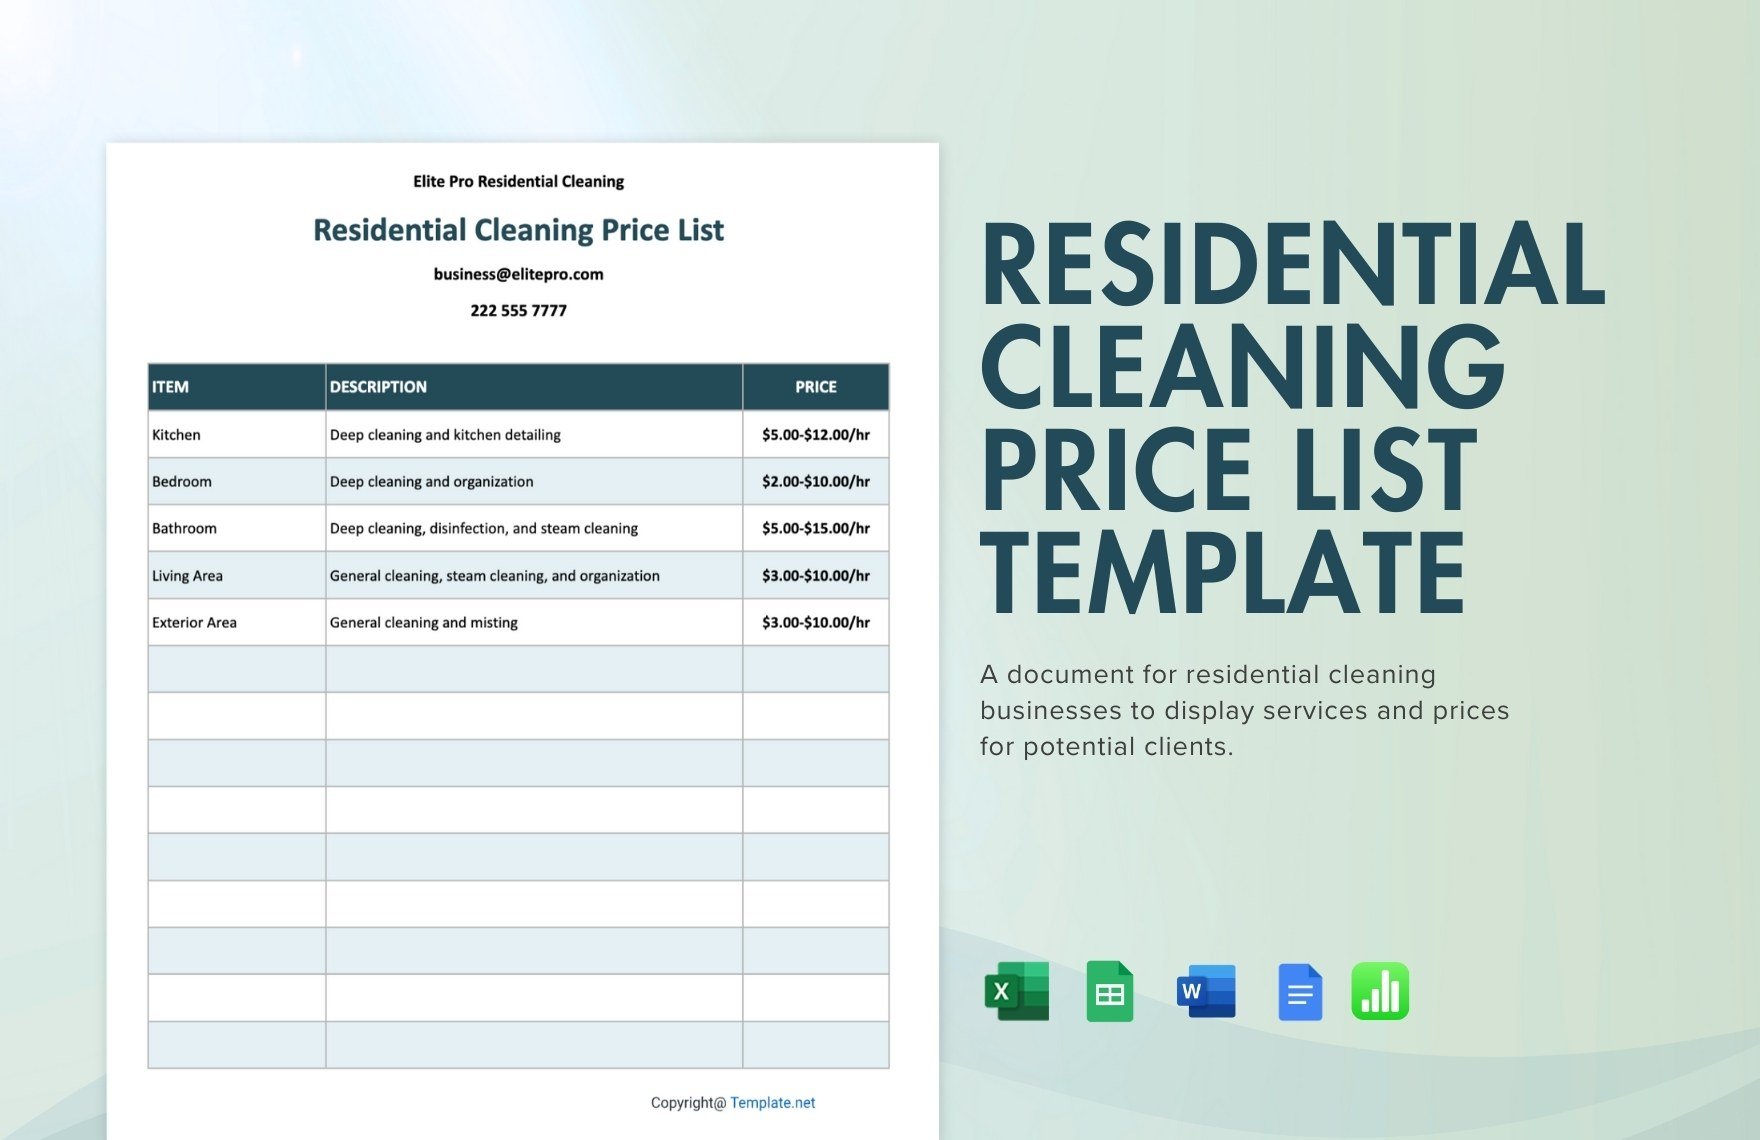 Residential Cleaning Price List Template in Word, Google Docs, Excel, Google Sheets, Apple Numbers